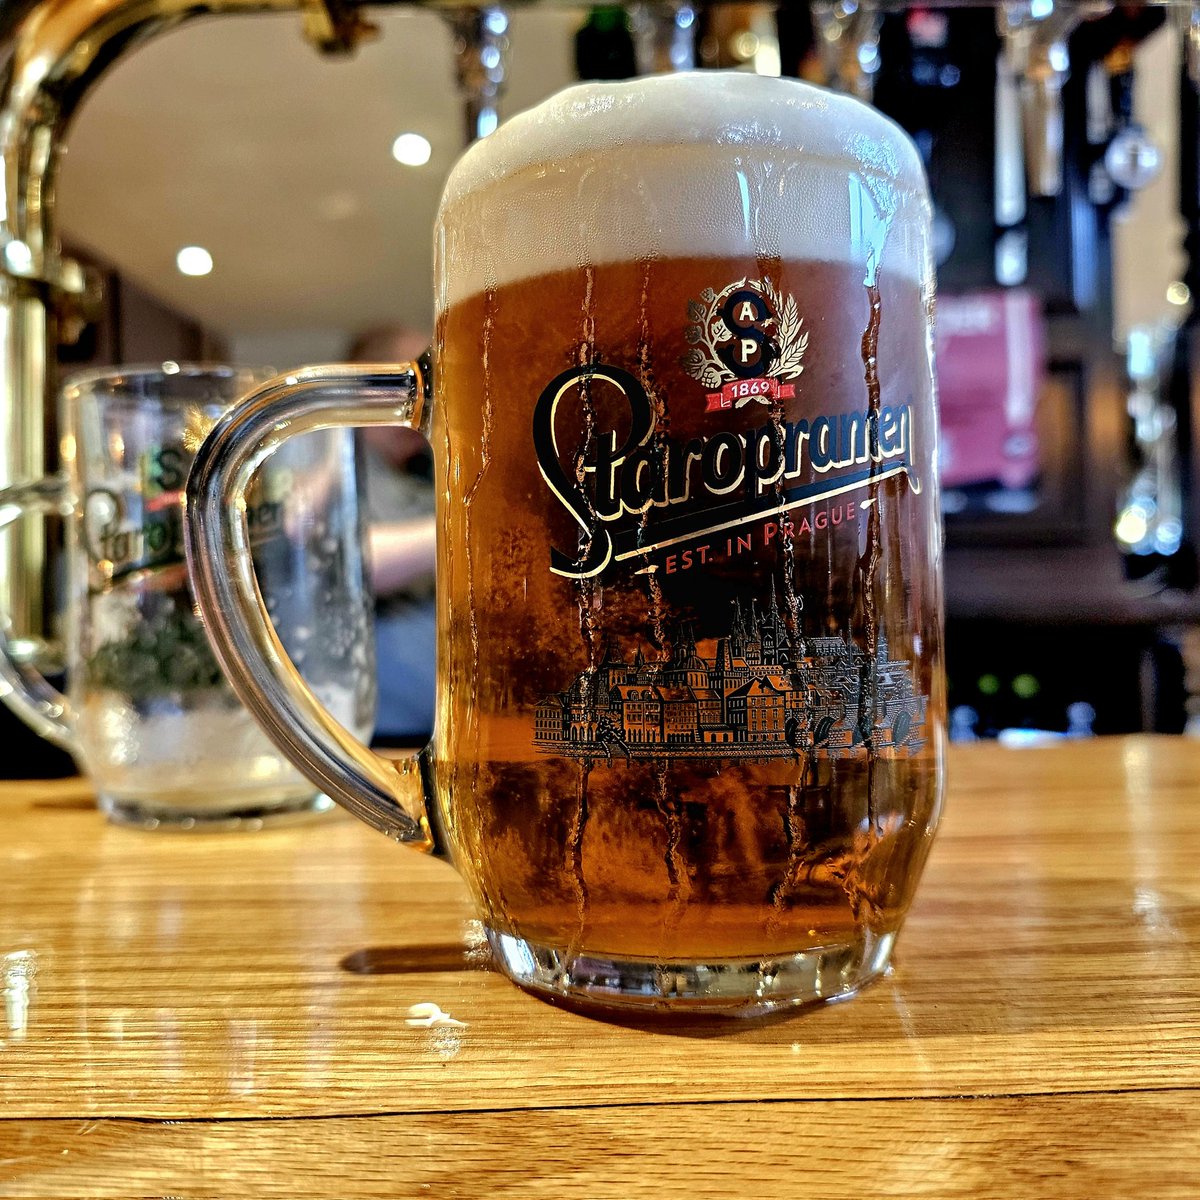 That's how a perfectly poured Pint of Staropramen looks,Head begins above the S crest and froth rising above the top of the glass,£5.50 as well...Support Pubs who serve perfectly poured Pints in the right glass🍻🍻🍻👌👌👌